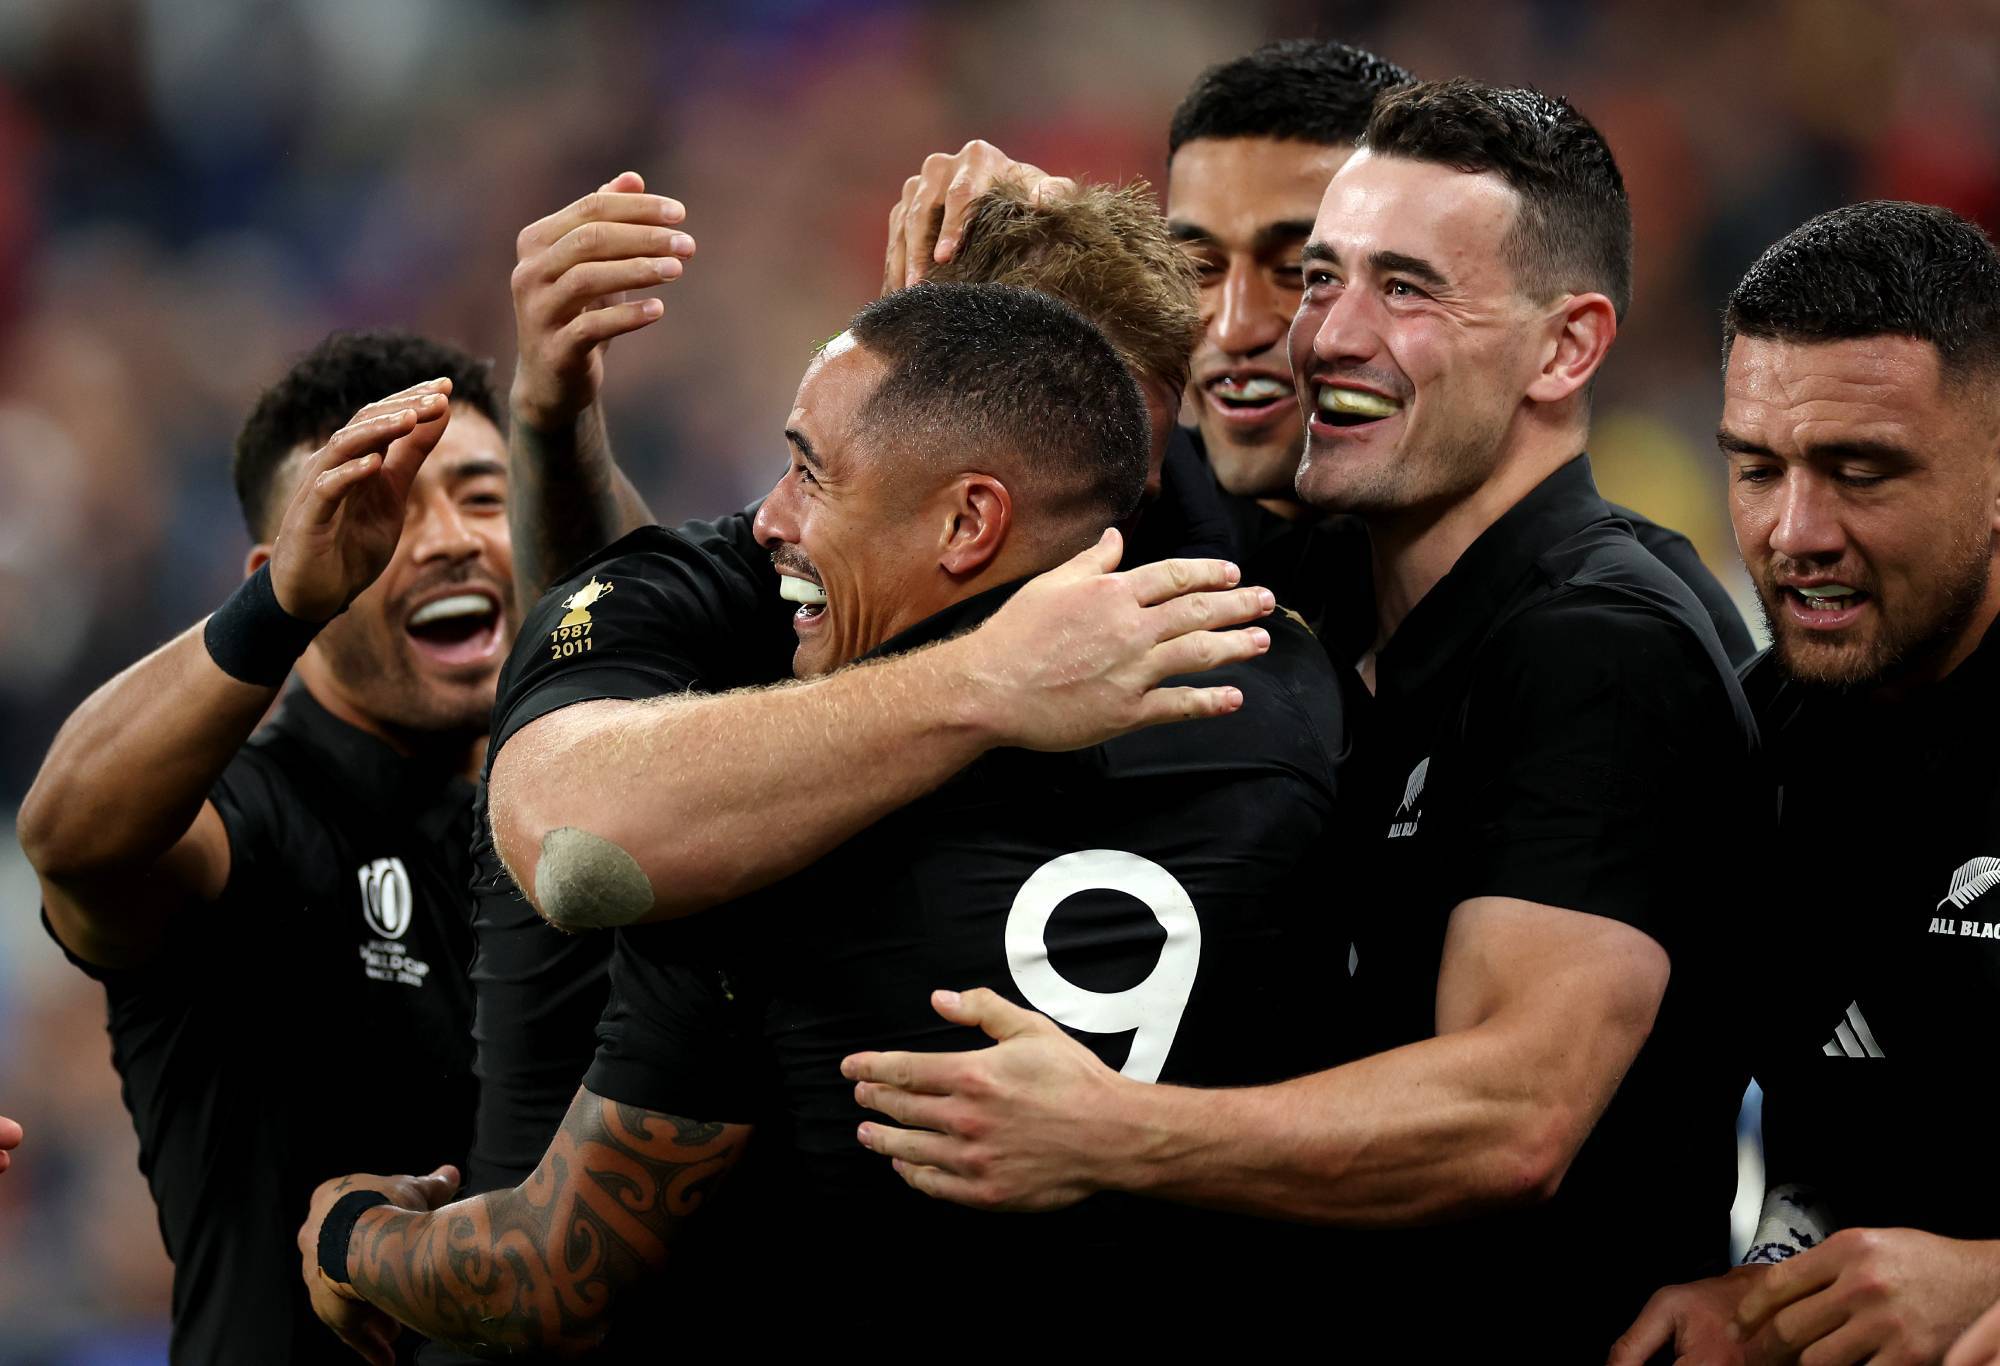 Aaron Smith of New Zealand celebrates with teammates after scoring his team's fourth try during the Rugby World Cup France 2023 semi-final match between Argentina and New Zealand at Stade de France on October 20, 2023 in Paris, France. (Photo by Cameron Spencer/Getty Images)